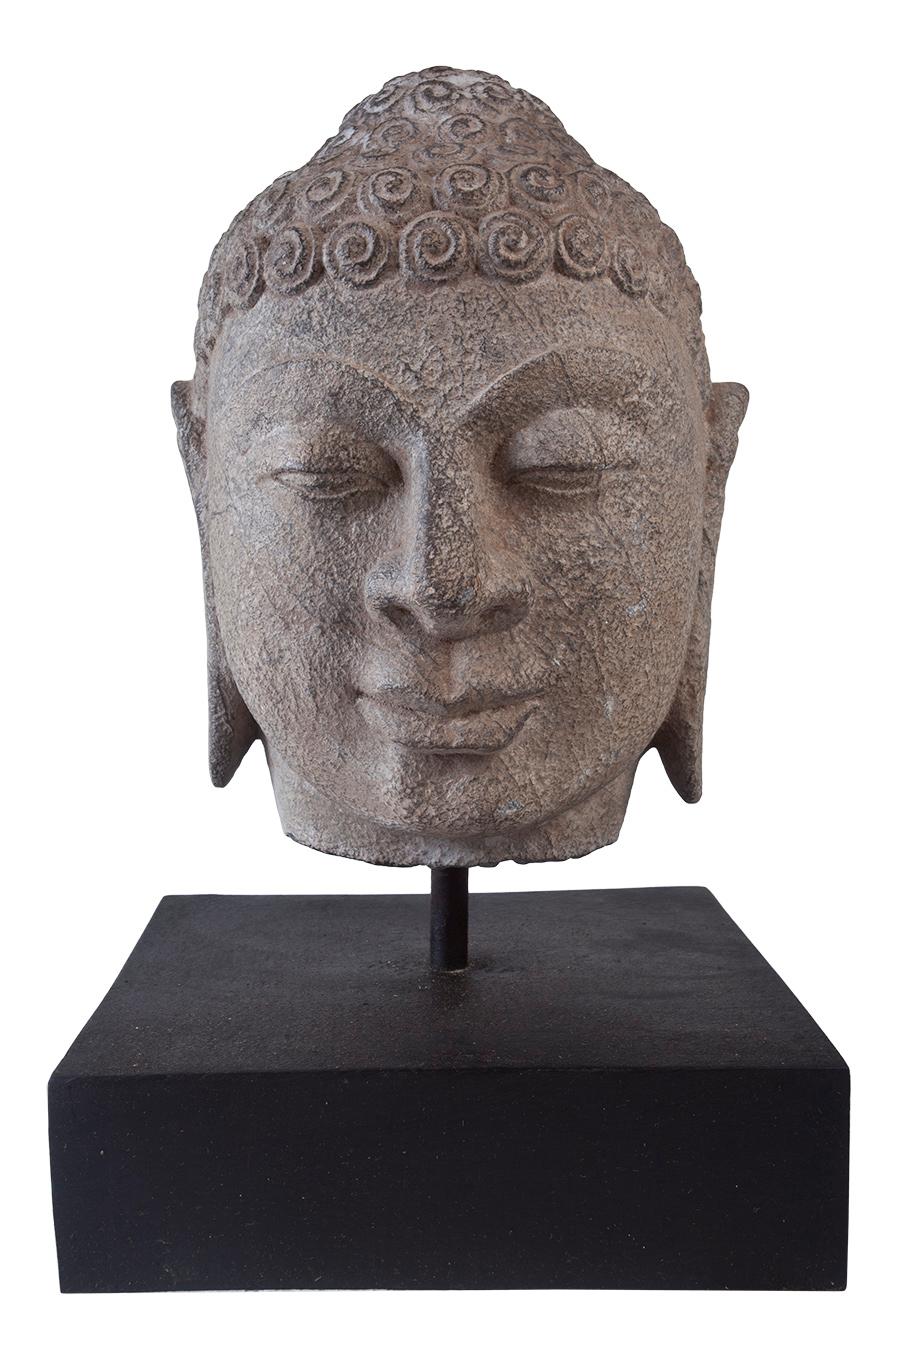 A lovely granite Buddha head on wooden base, early 1900s, India Features include the typical curled hair, elongated ears, half-closed eyes and serene smile. The Ushnisha crown depicts the wisdom and illumination after attaining enlightenment. Just